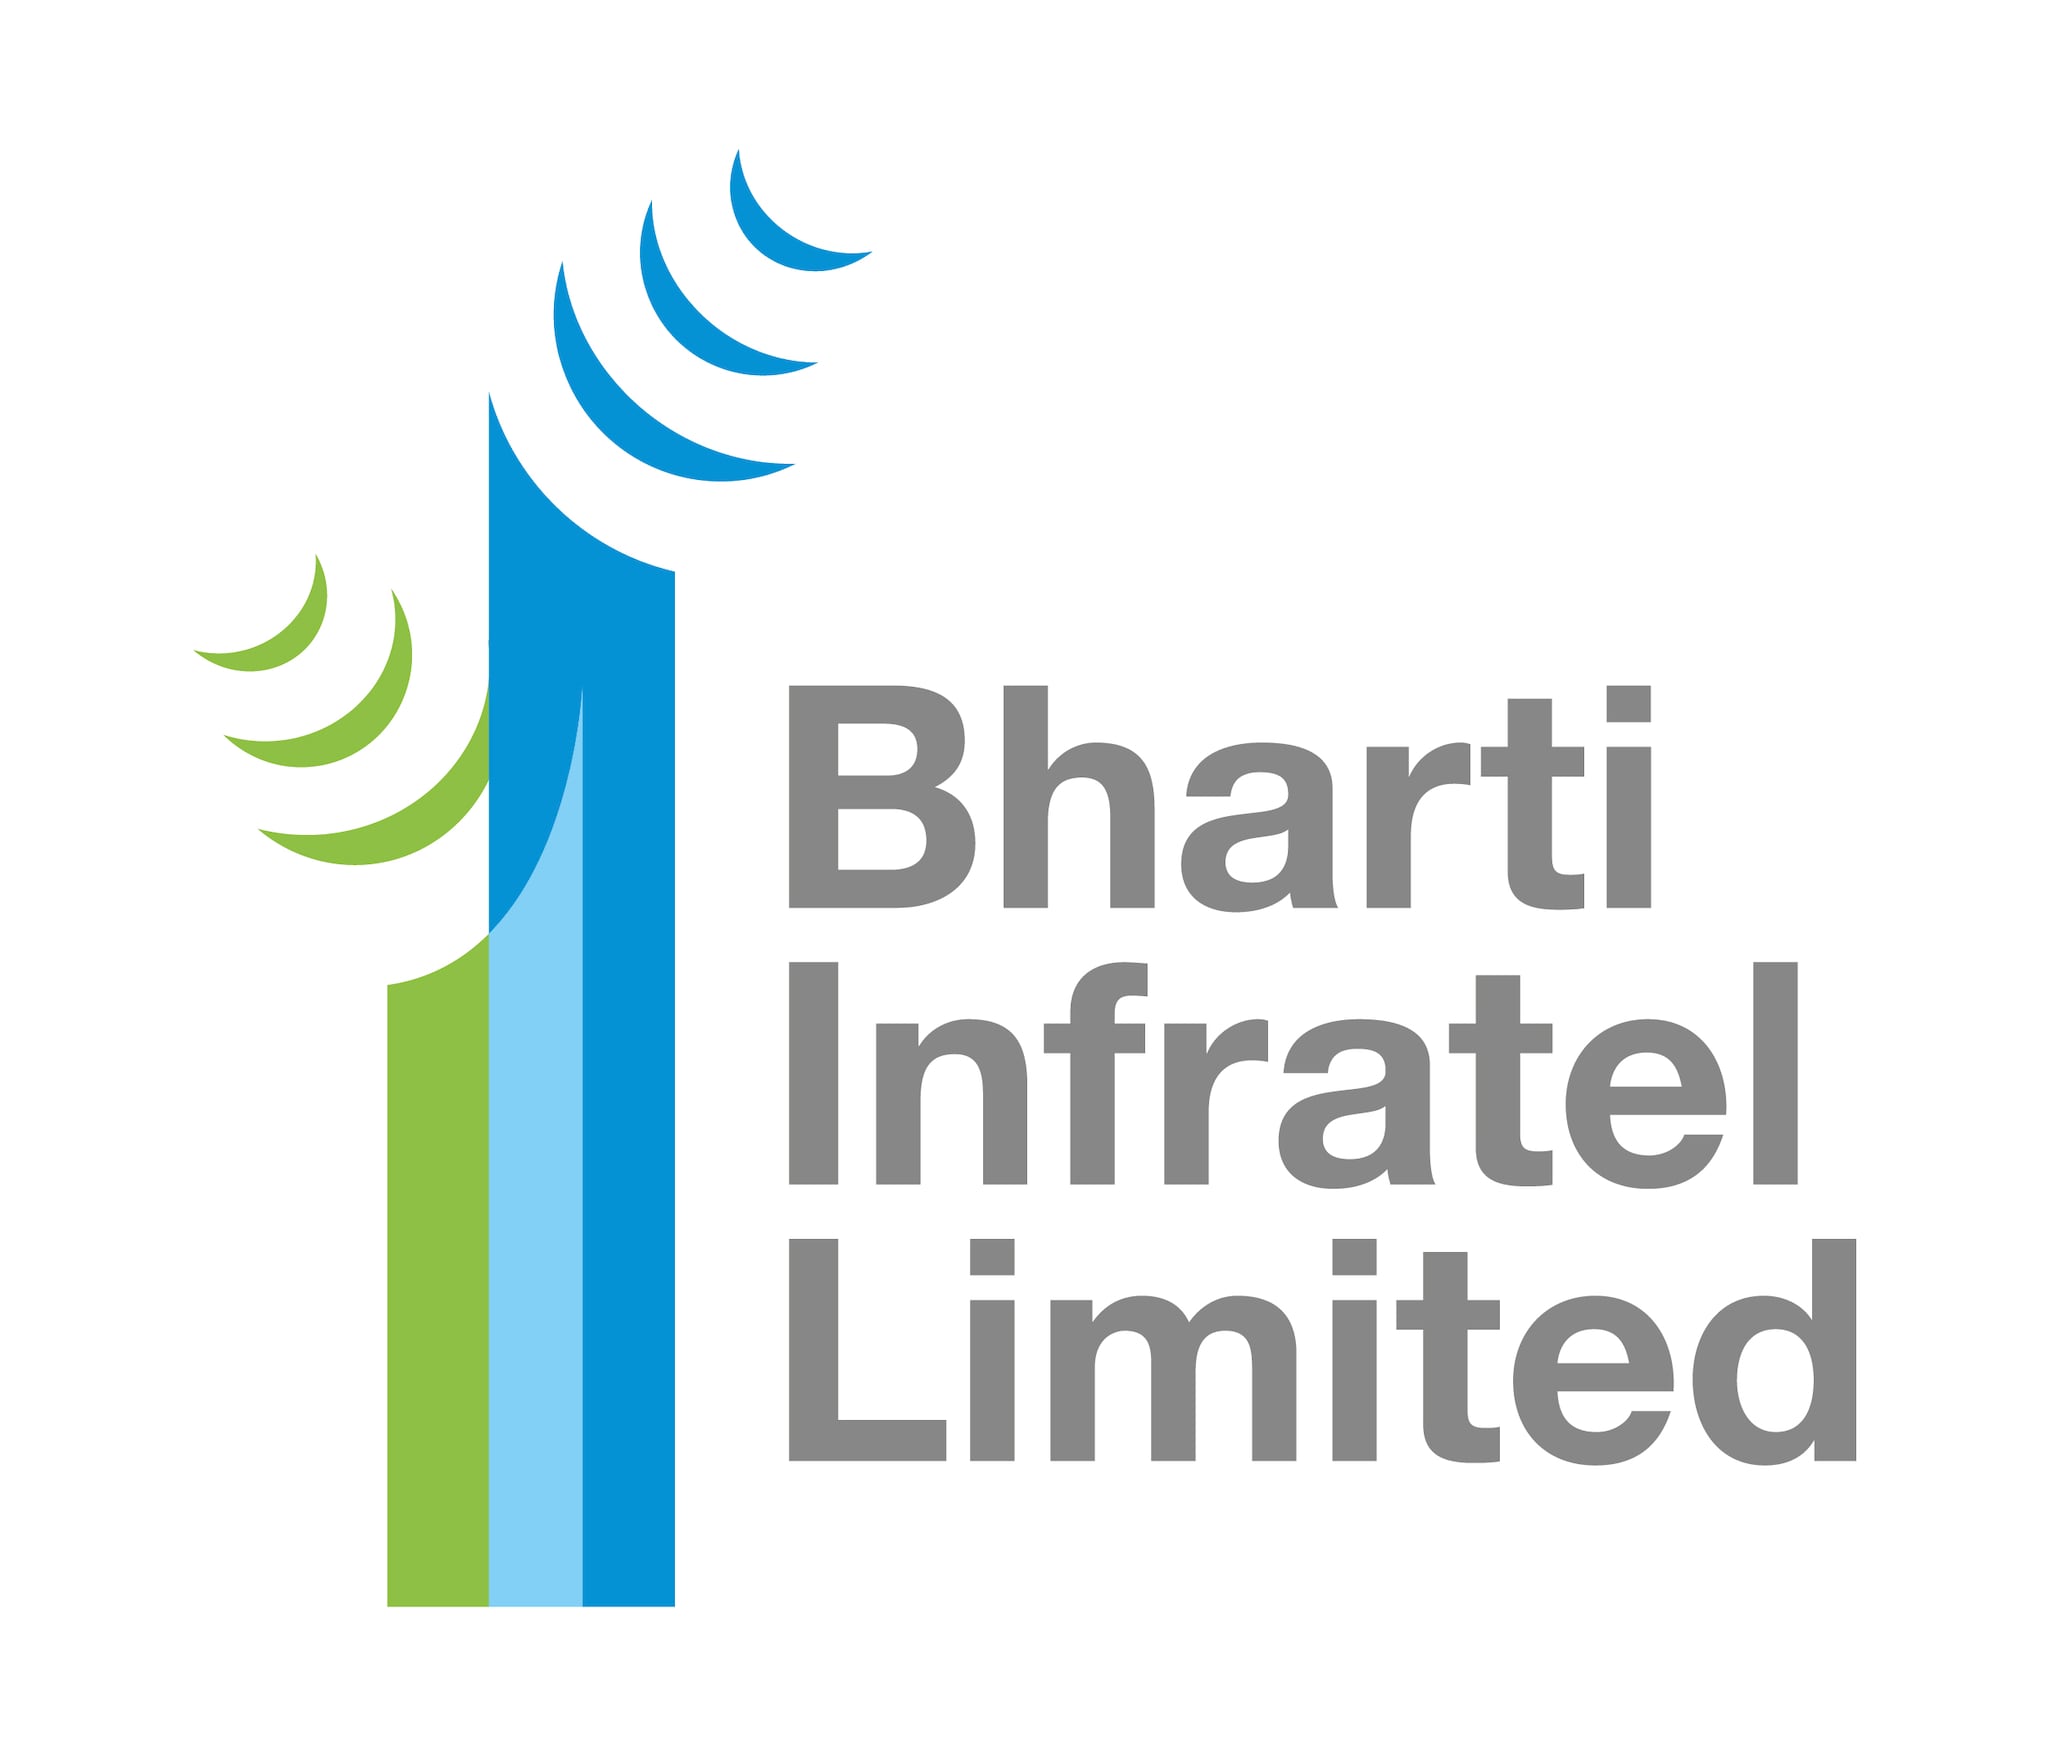  Bharti Infratel:  The company reported an 8.3 percent rise in Q1FY21 net profit to Rs 703.6 crore as against Rs 649.5 crore in the previous quarter. Revenue dropped 3.3 percent to Rs 3,504.7 crore from Rs 3,624.4 crore, QoQ. EBIT increased 5 percent to Rs 1,807 crore while EBIT margin improved by 410 bps to 51.6 percent, QoQ.